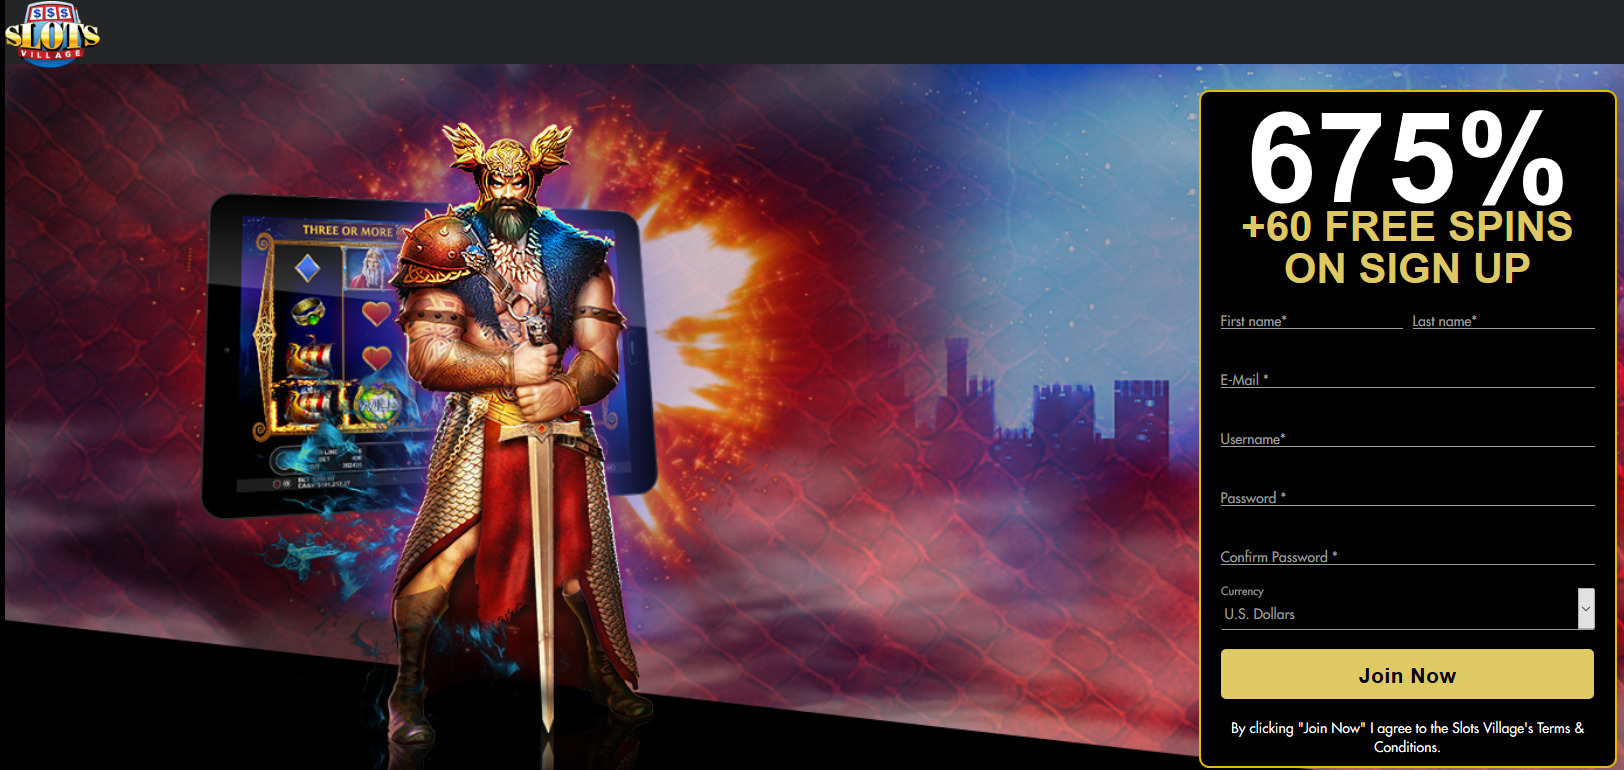 Slots Village Casino 675% + 60 free spins. Game: Beowulf